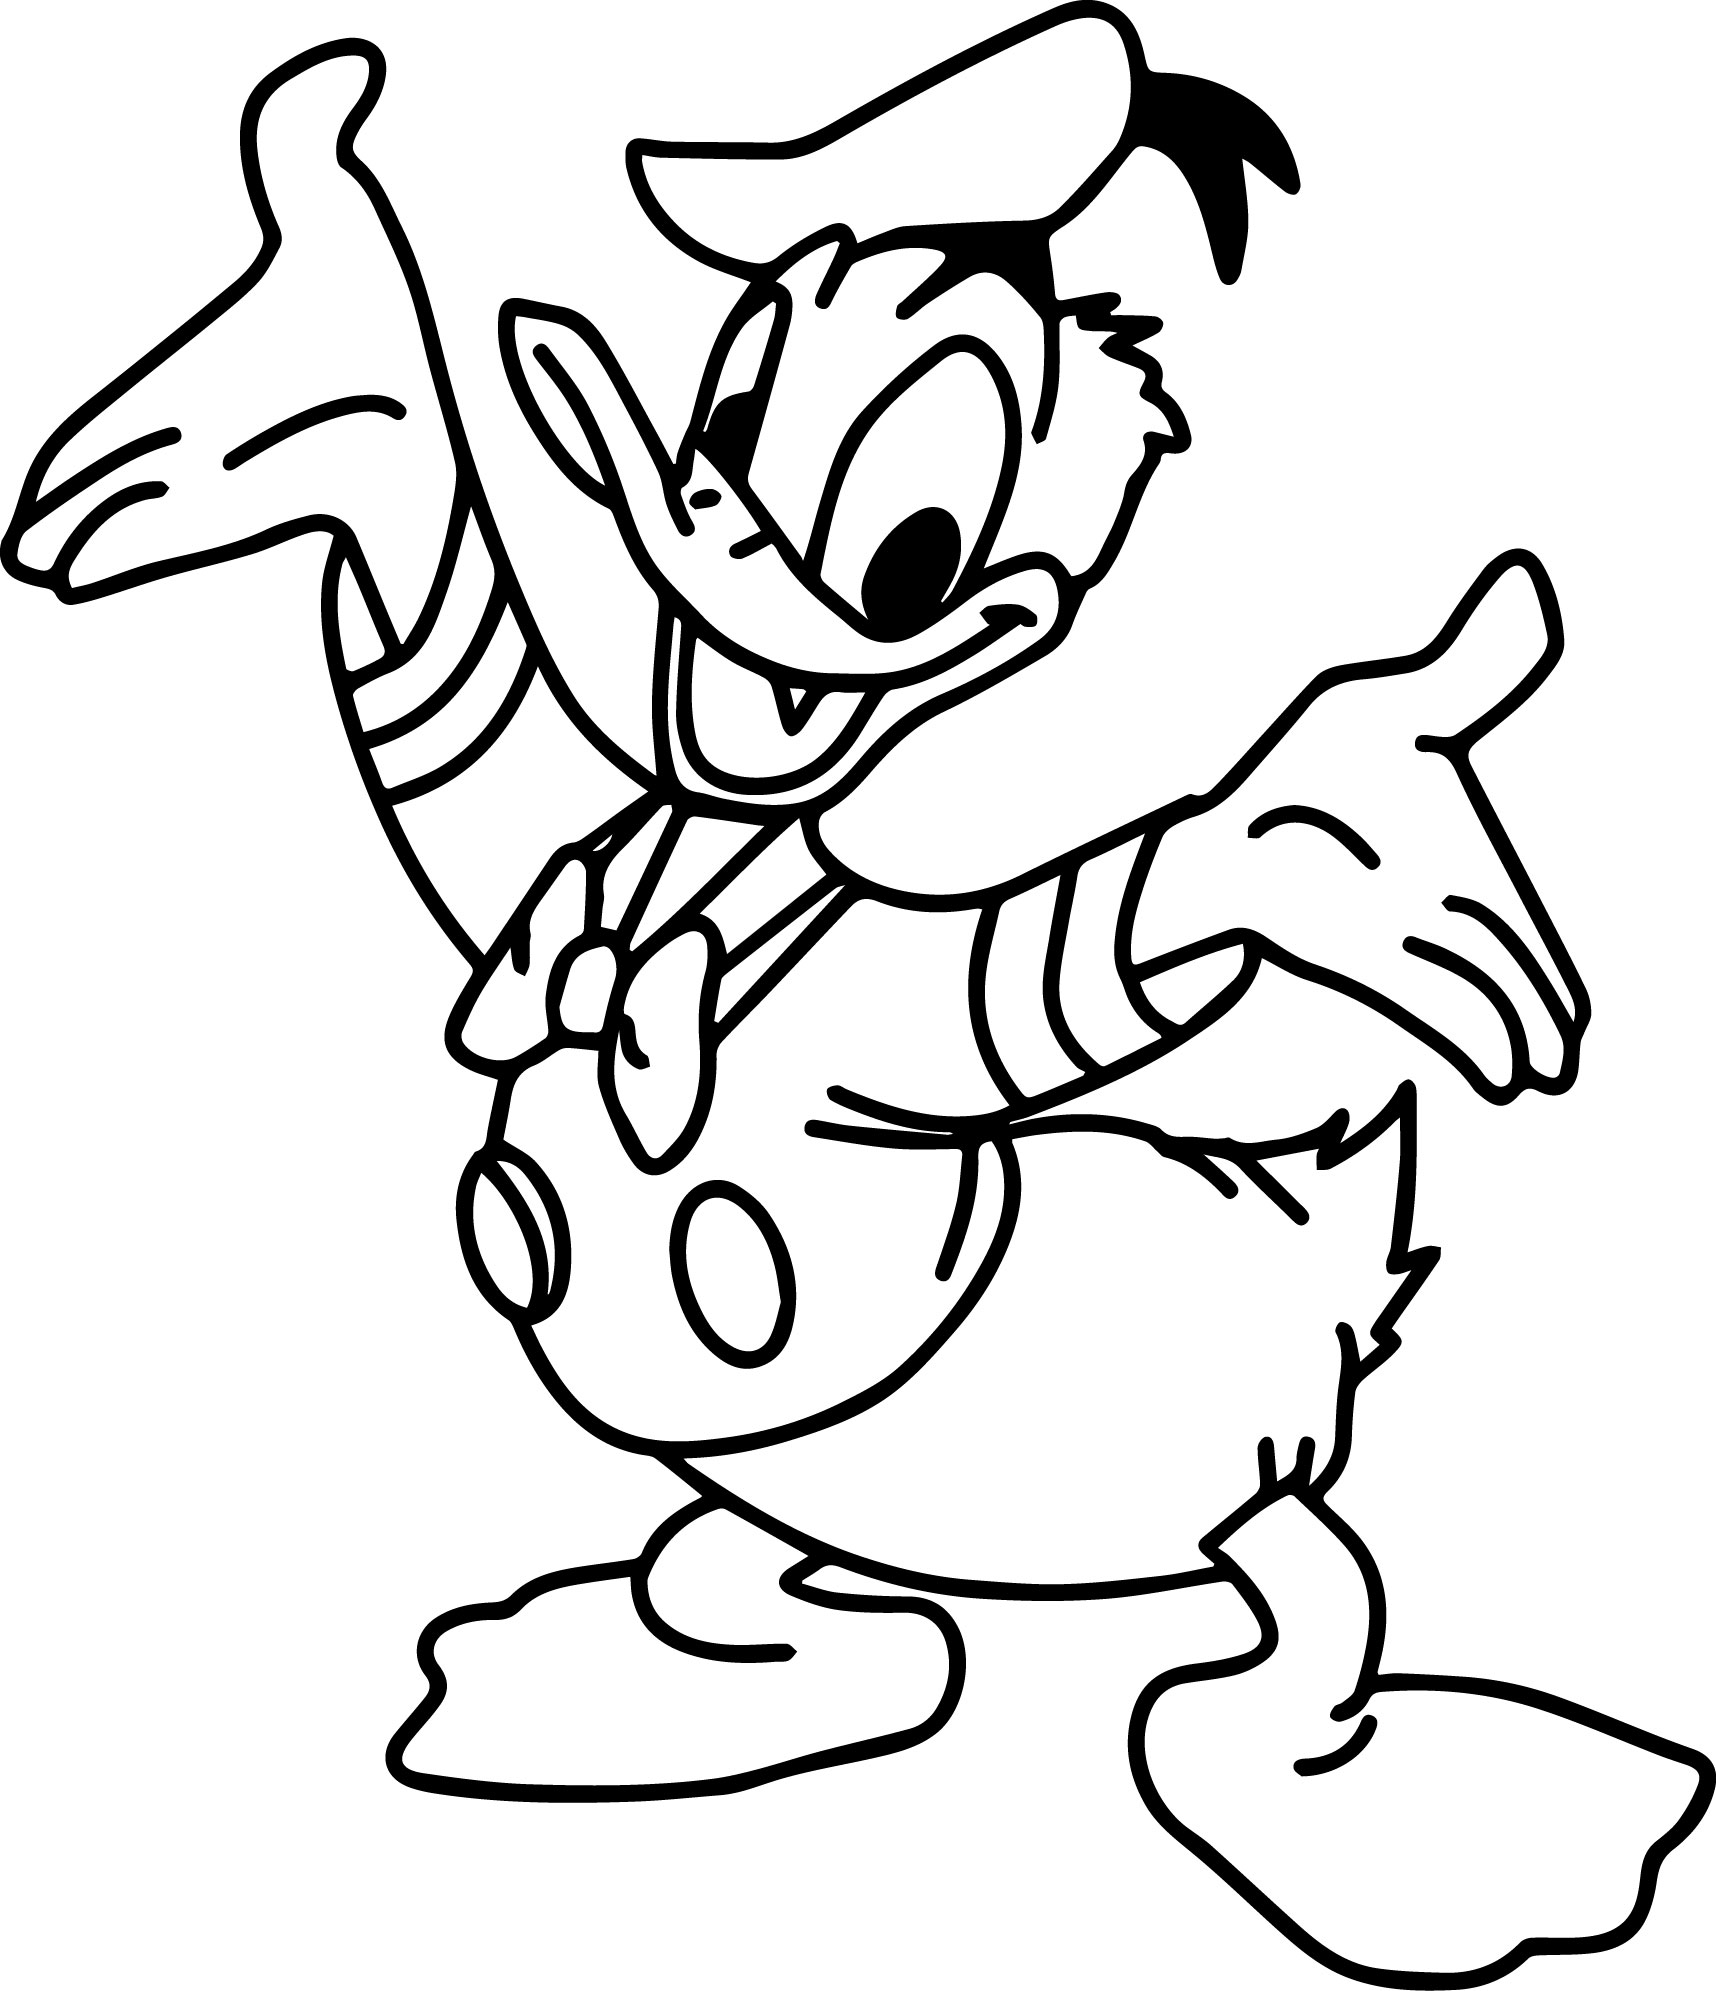 Donald Duck Printable Coloring Pages at GetDrawings Free download